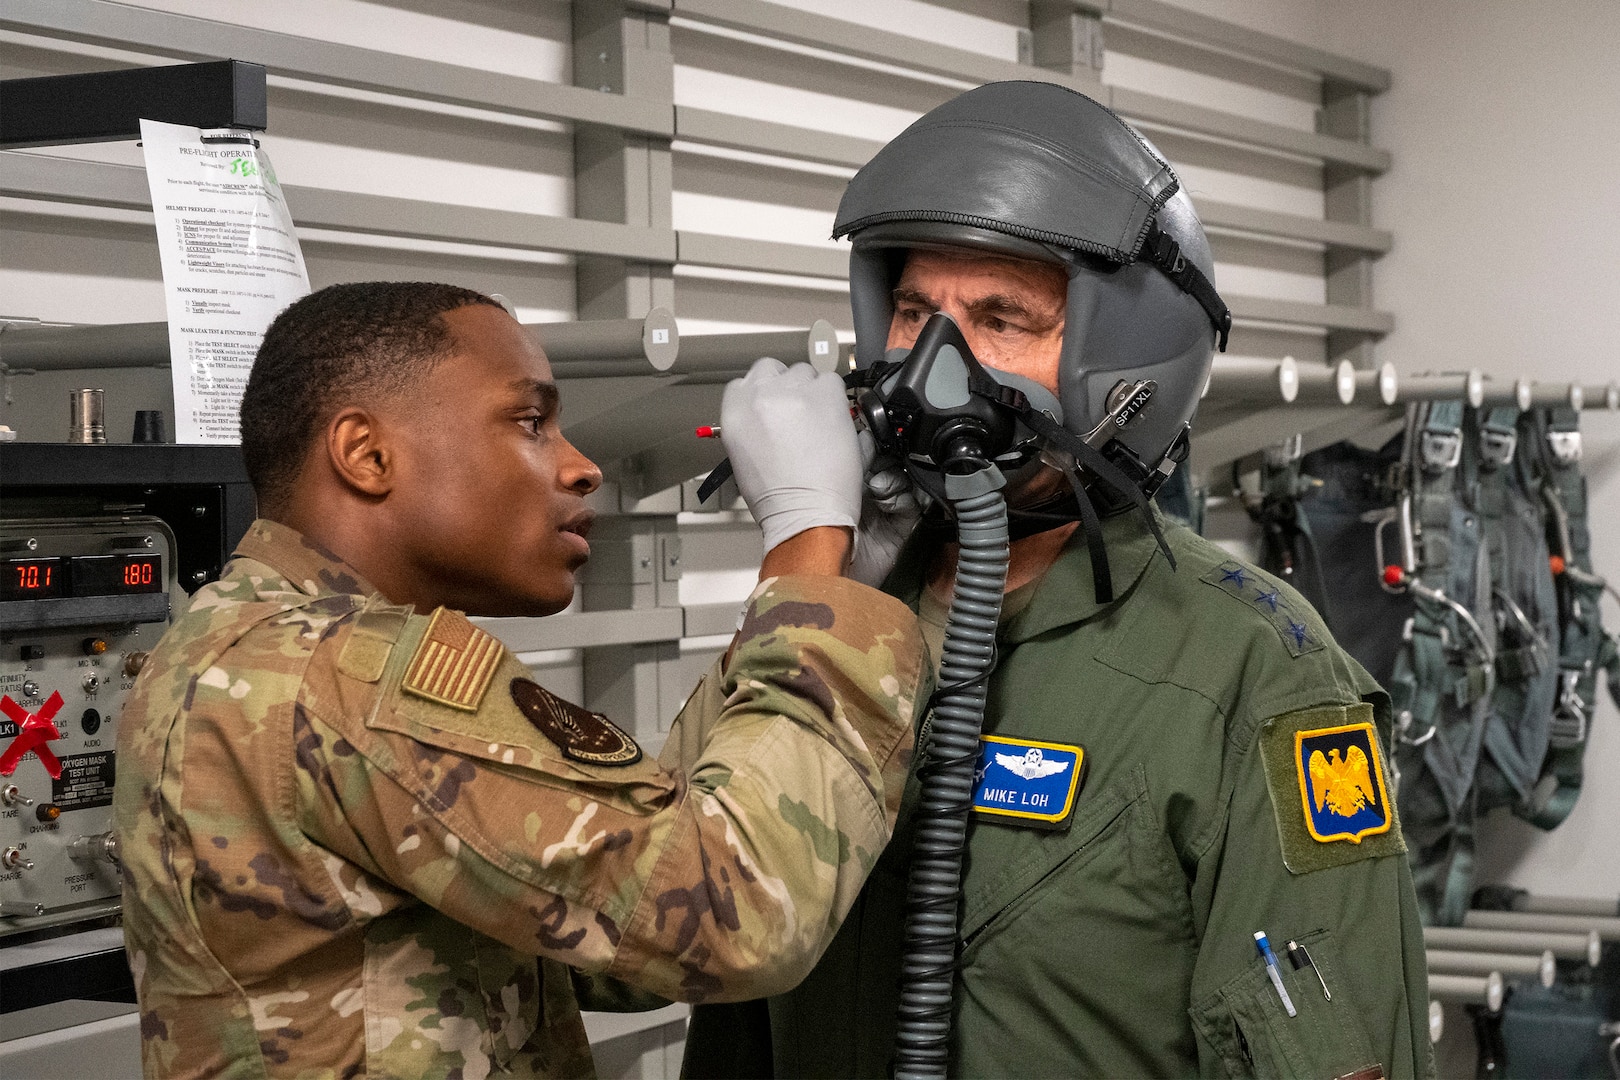 U.S. Air Force Senior Airman Anthony Ratliff, aircrew flight equipment technician with 509th Operations Support Squadron, checks Air National Guard Director Lt. Gen. Michael Loh's oxygen mask for leaks during his visit to Whiteman Air Force Base, Missouri, May 13, 2022. Loh visited the Missouri Air National Guard's 131st Bomb Wing to learn about the total force B-2 Spirit stealth bomber mission. (U.S. Air National Guard photo by Master Sgt. John E. Hillier)